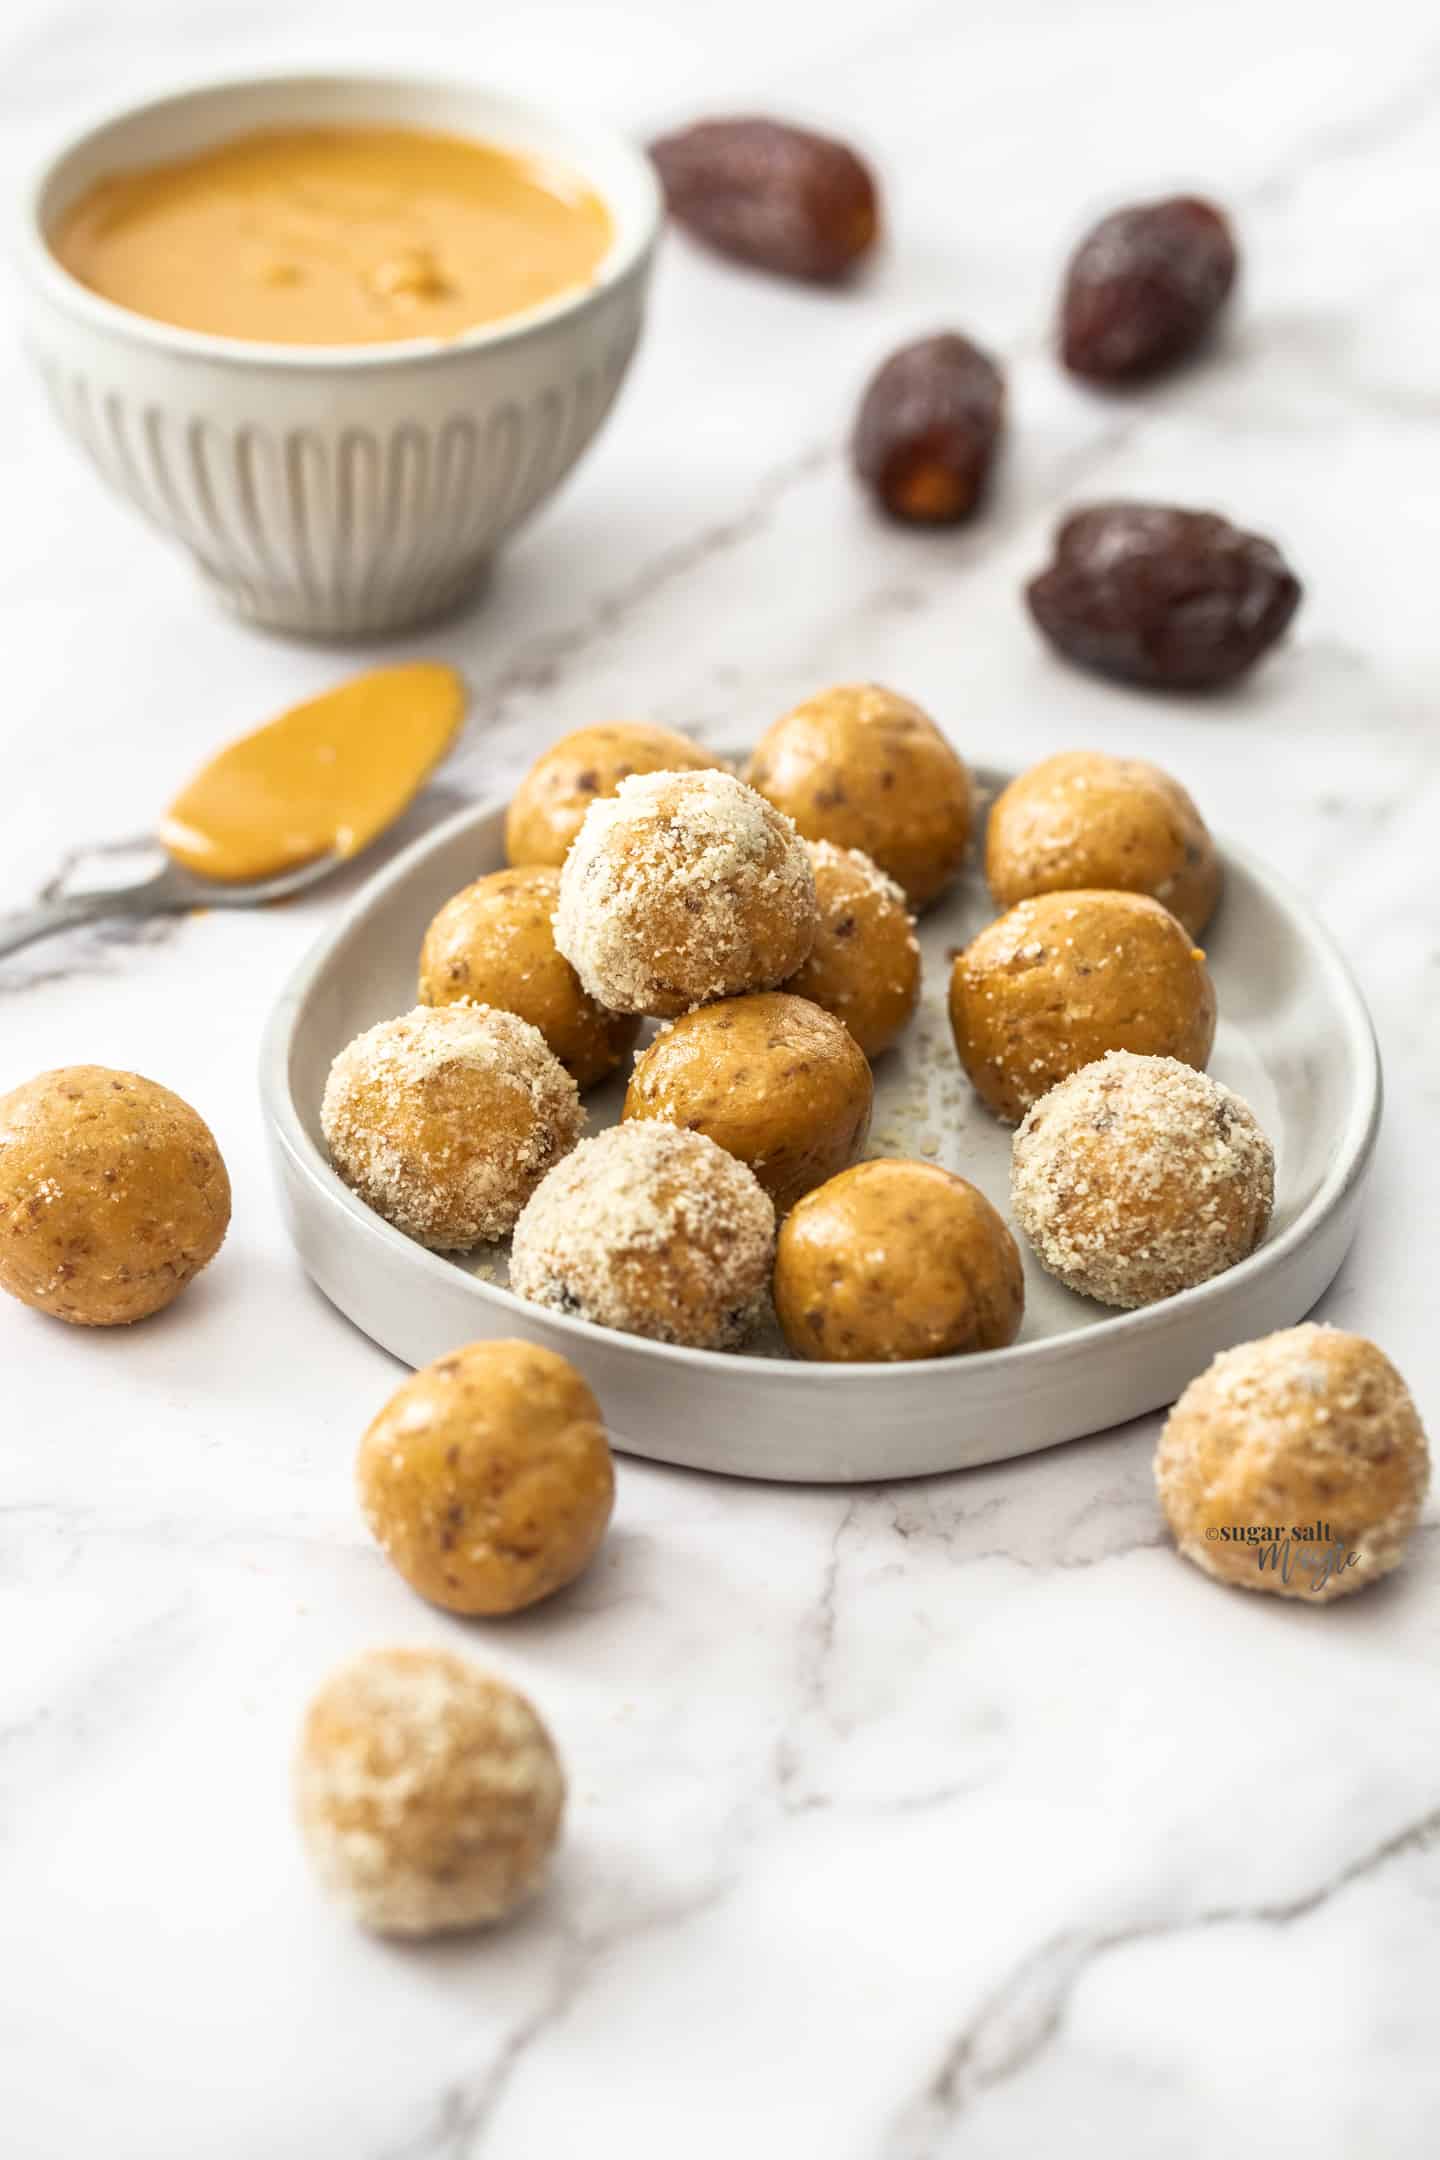 A batch of peanut butter bliss balls on a small dish with dates in the background.